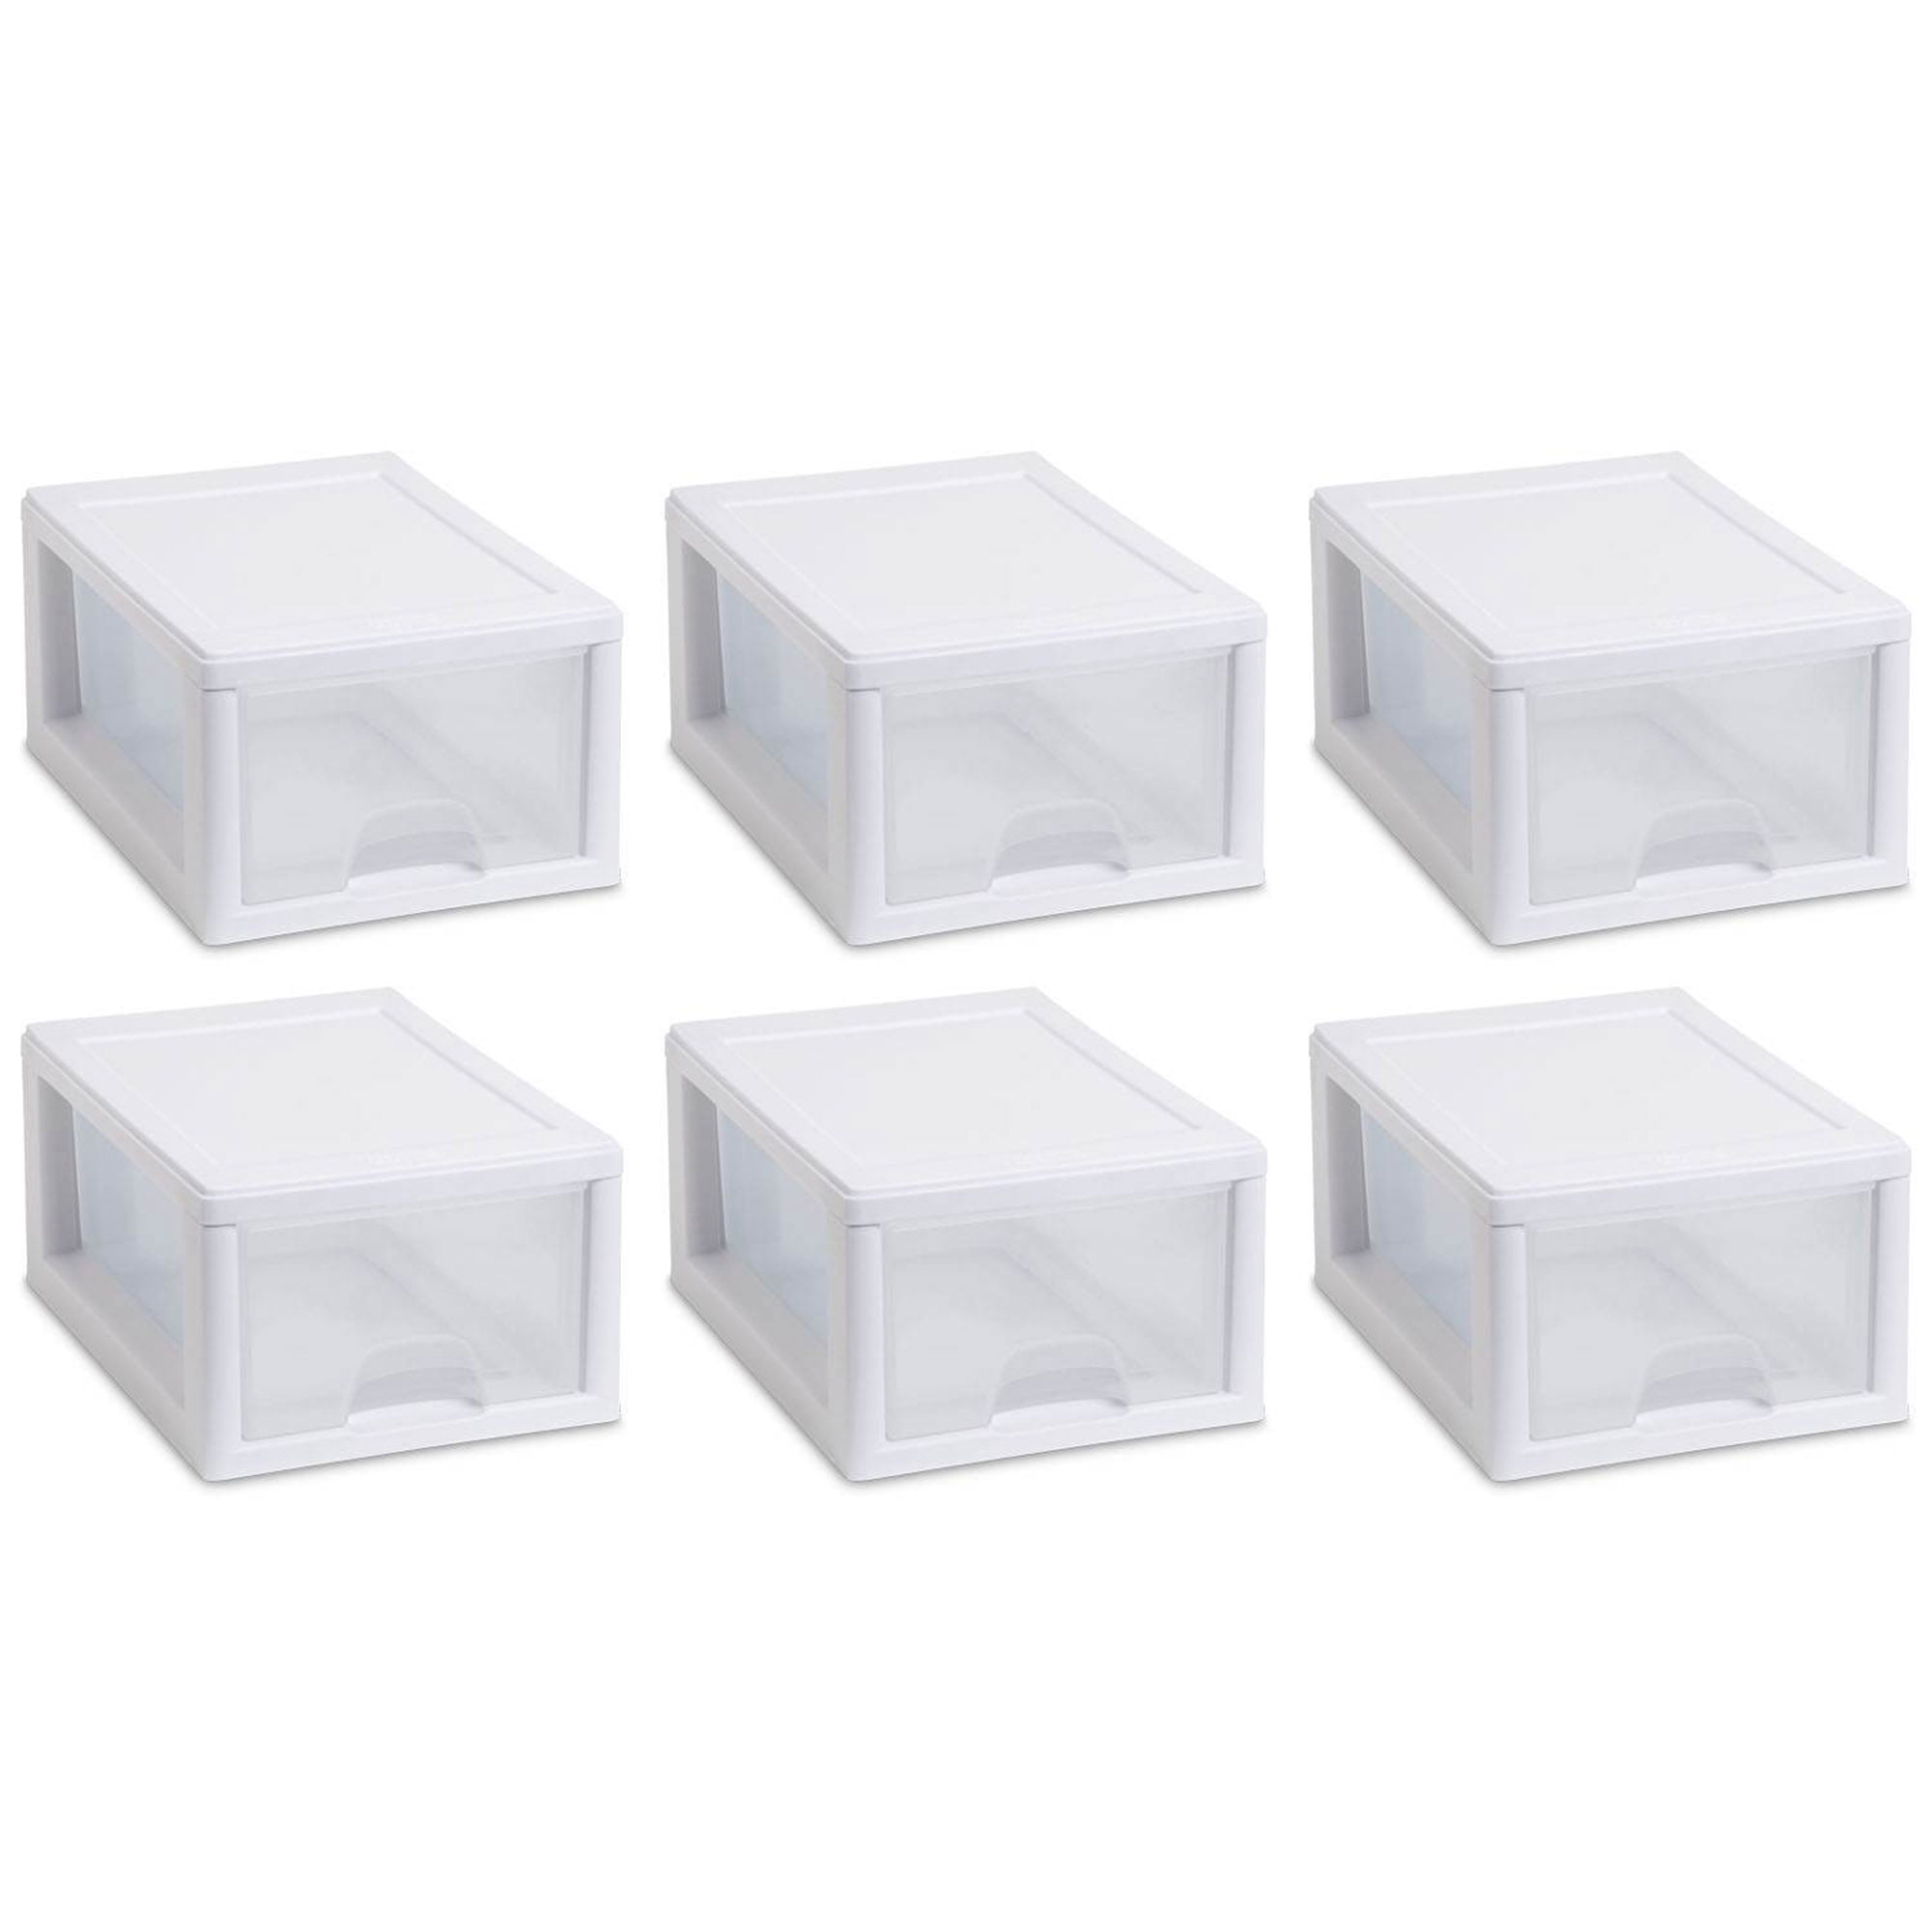 Sterilite ClearView 3-Drawer Wide Organizer - Clear/White, 14.6 x